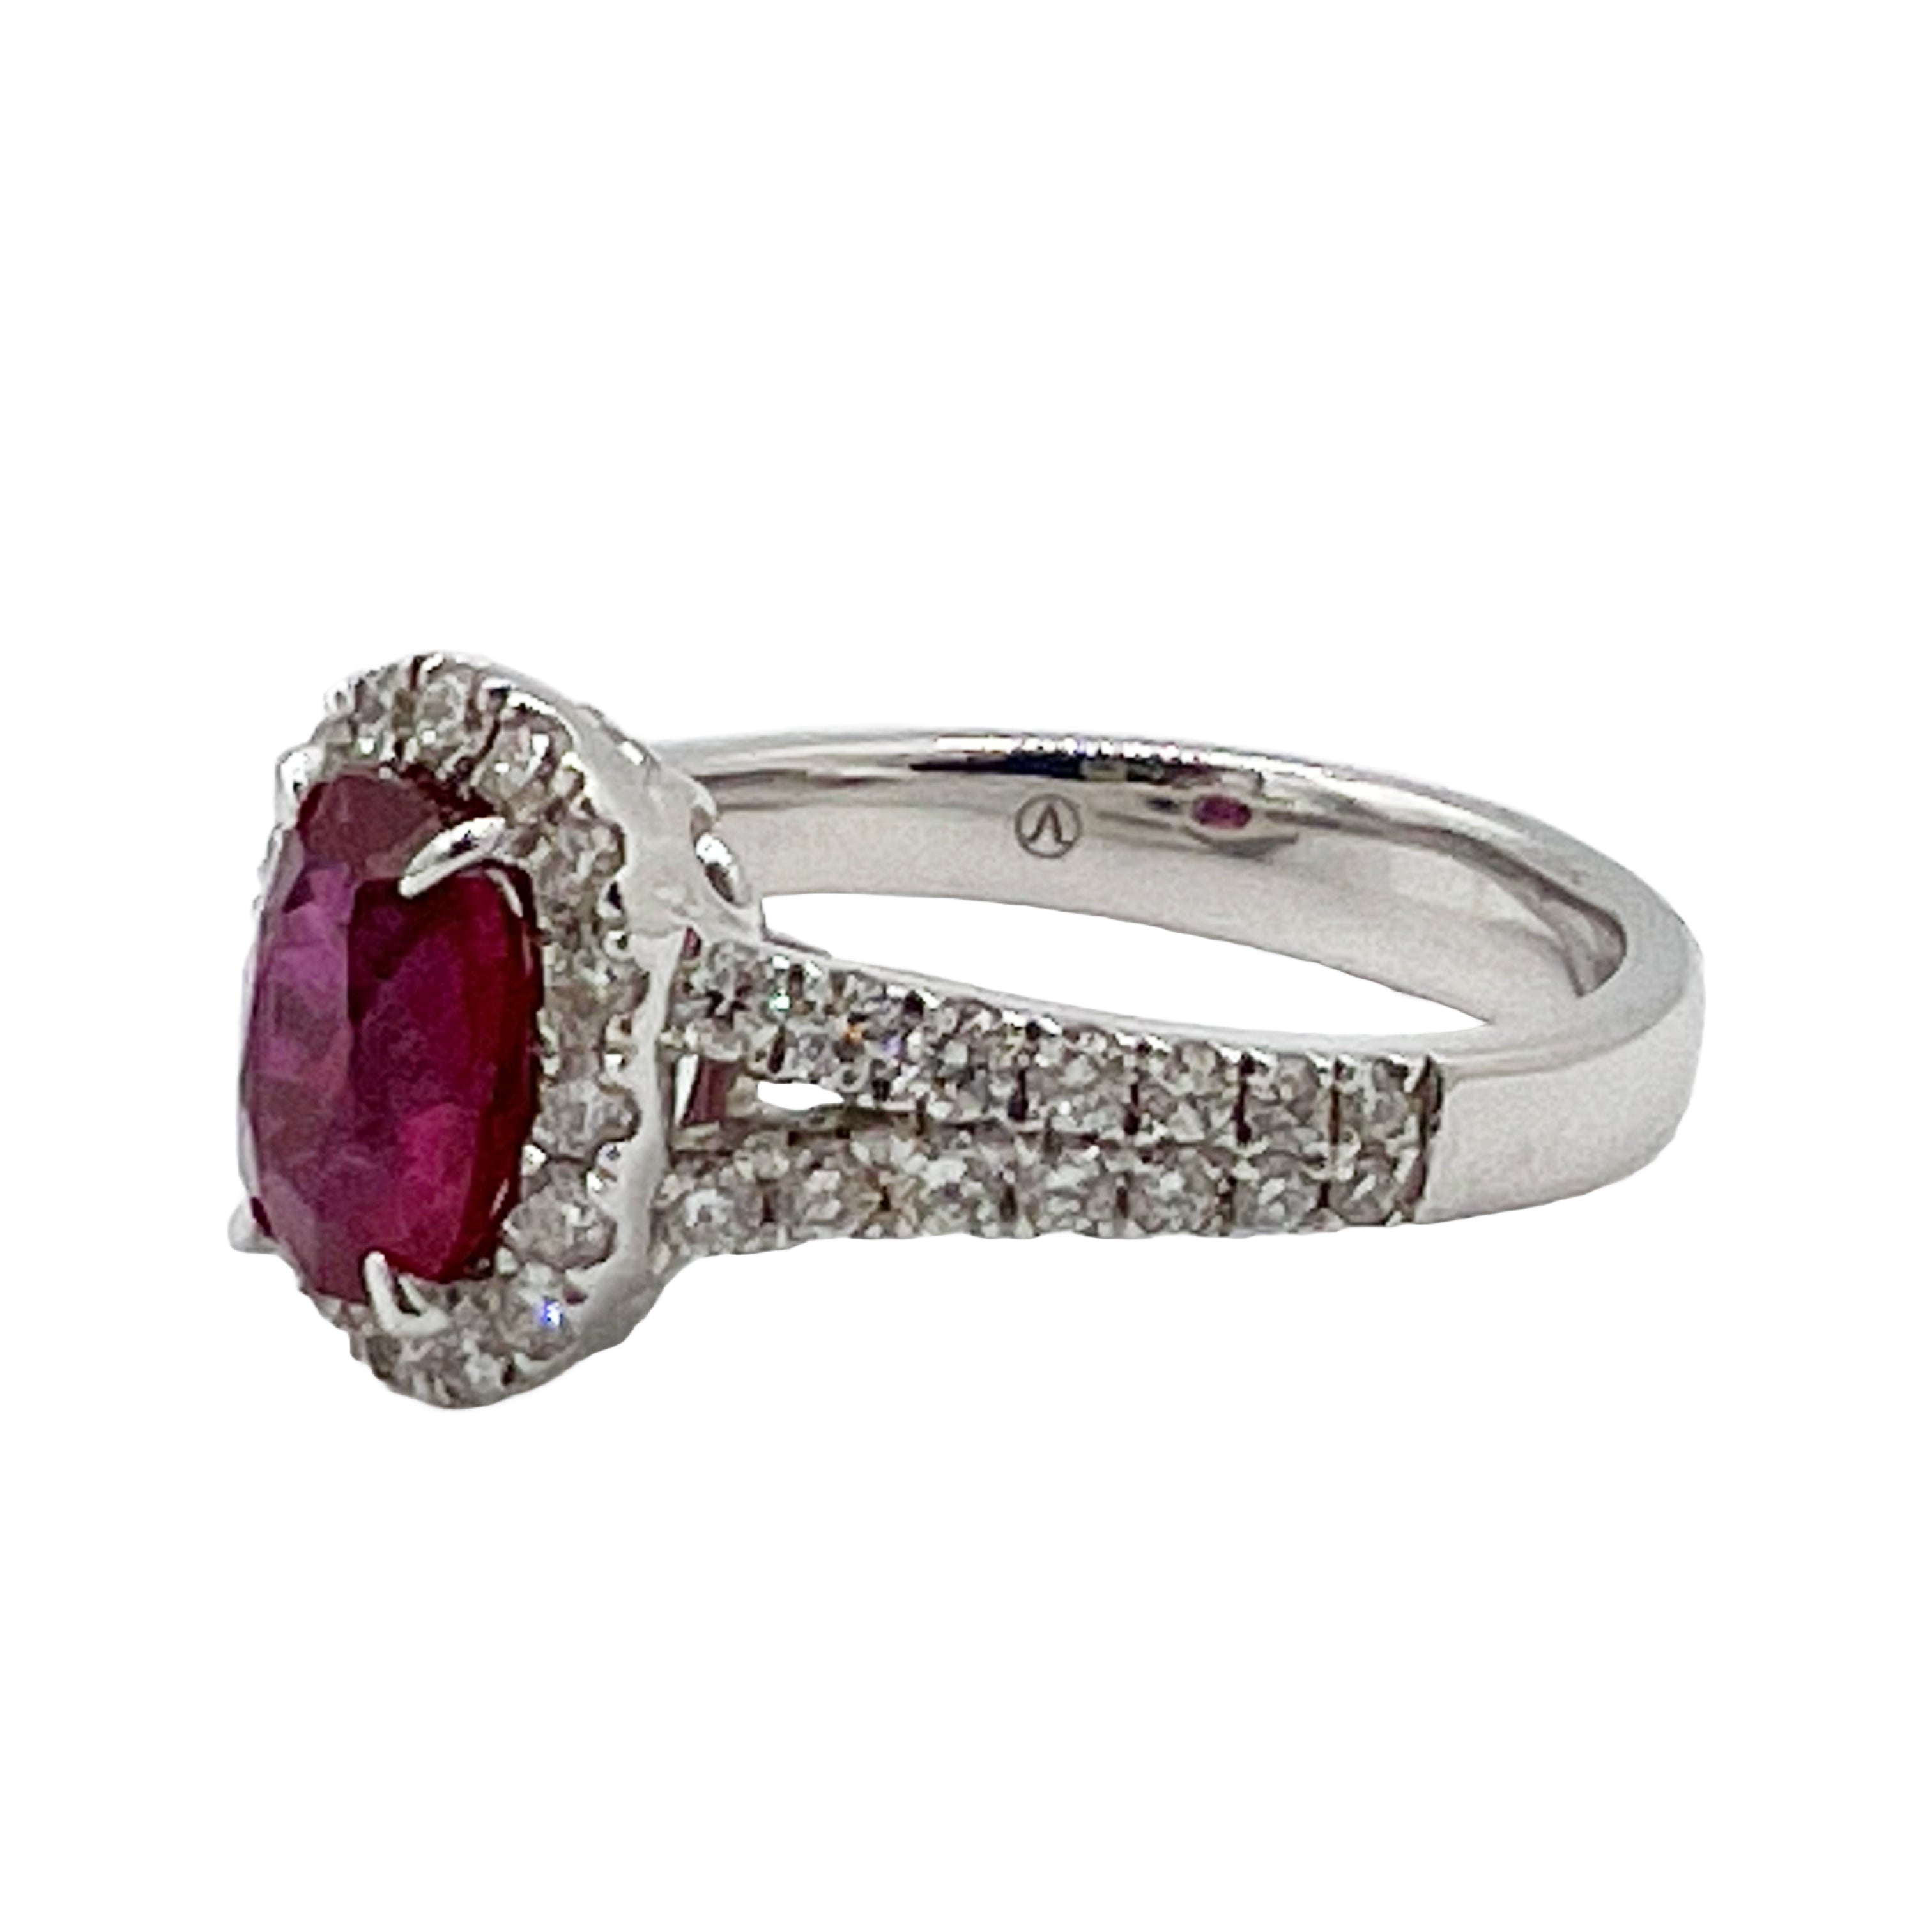 Ring 18KW/3.3G 1RUBY-1.54CT 54RD-0.65CT